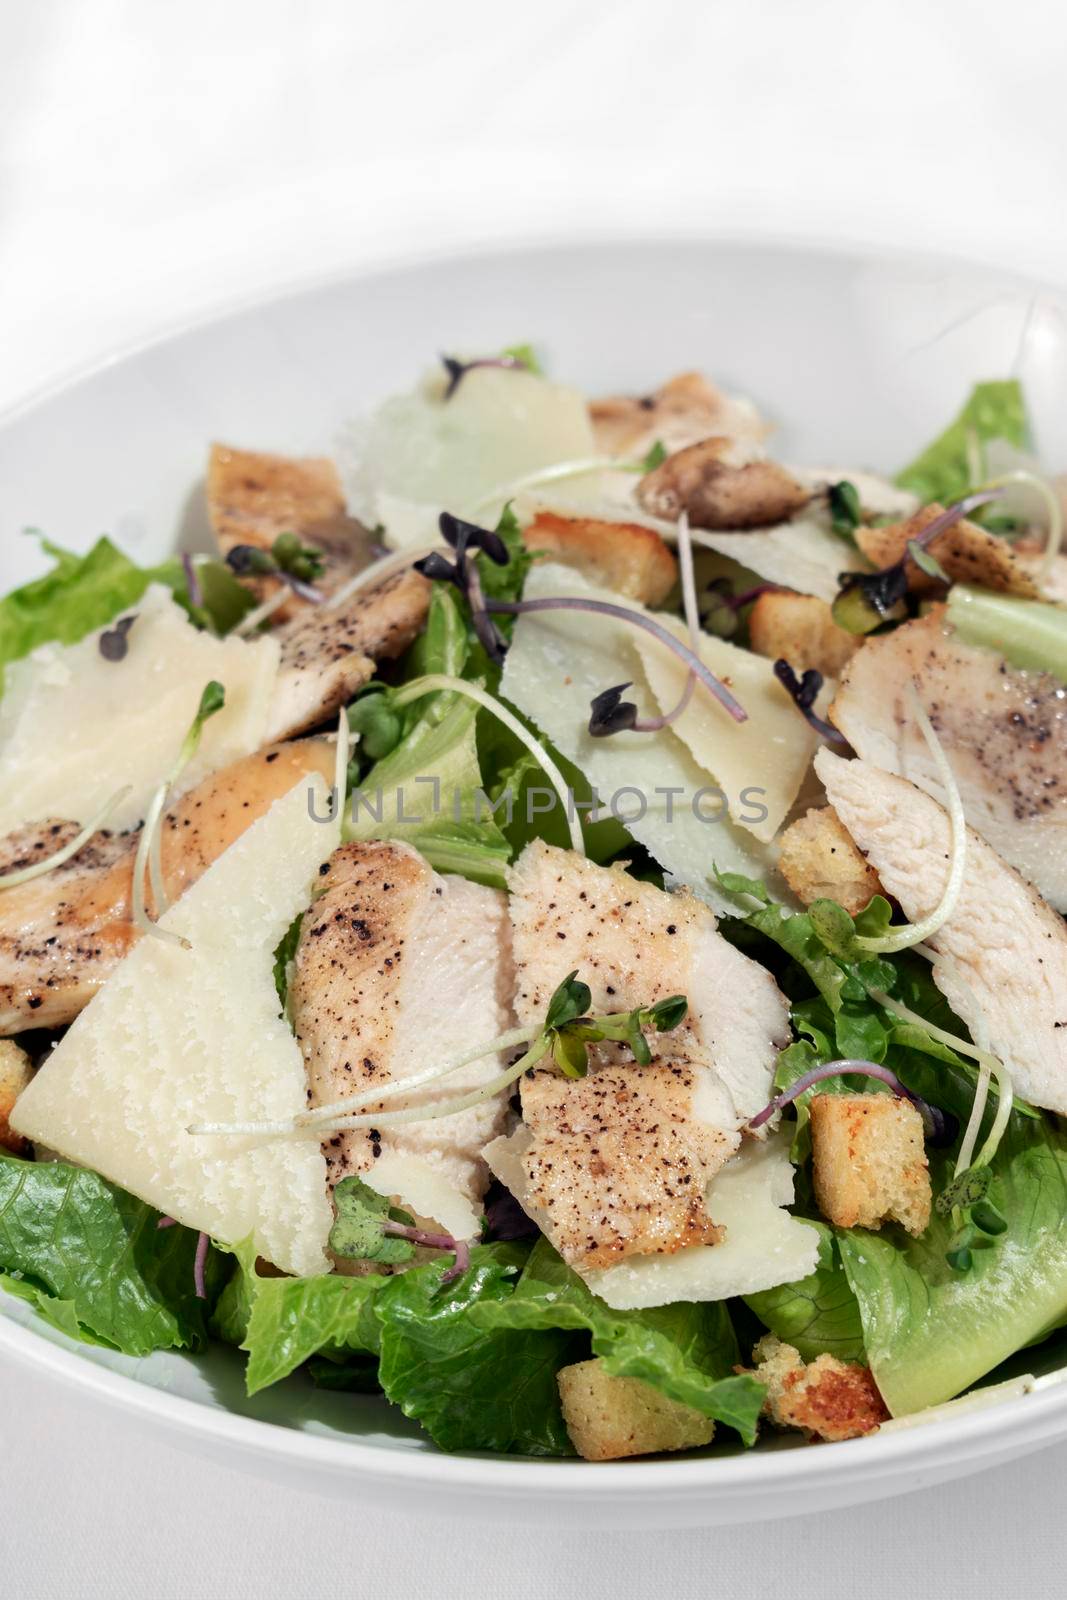 organic chicken caesar salad with parmesan cheese and croutons by jackmalipan